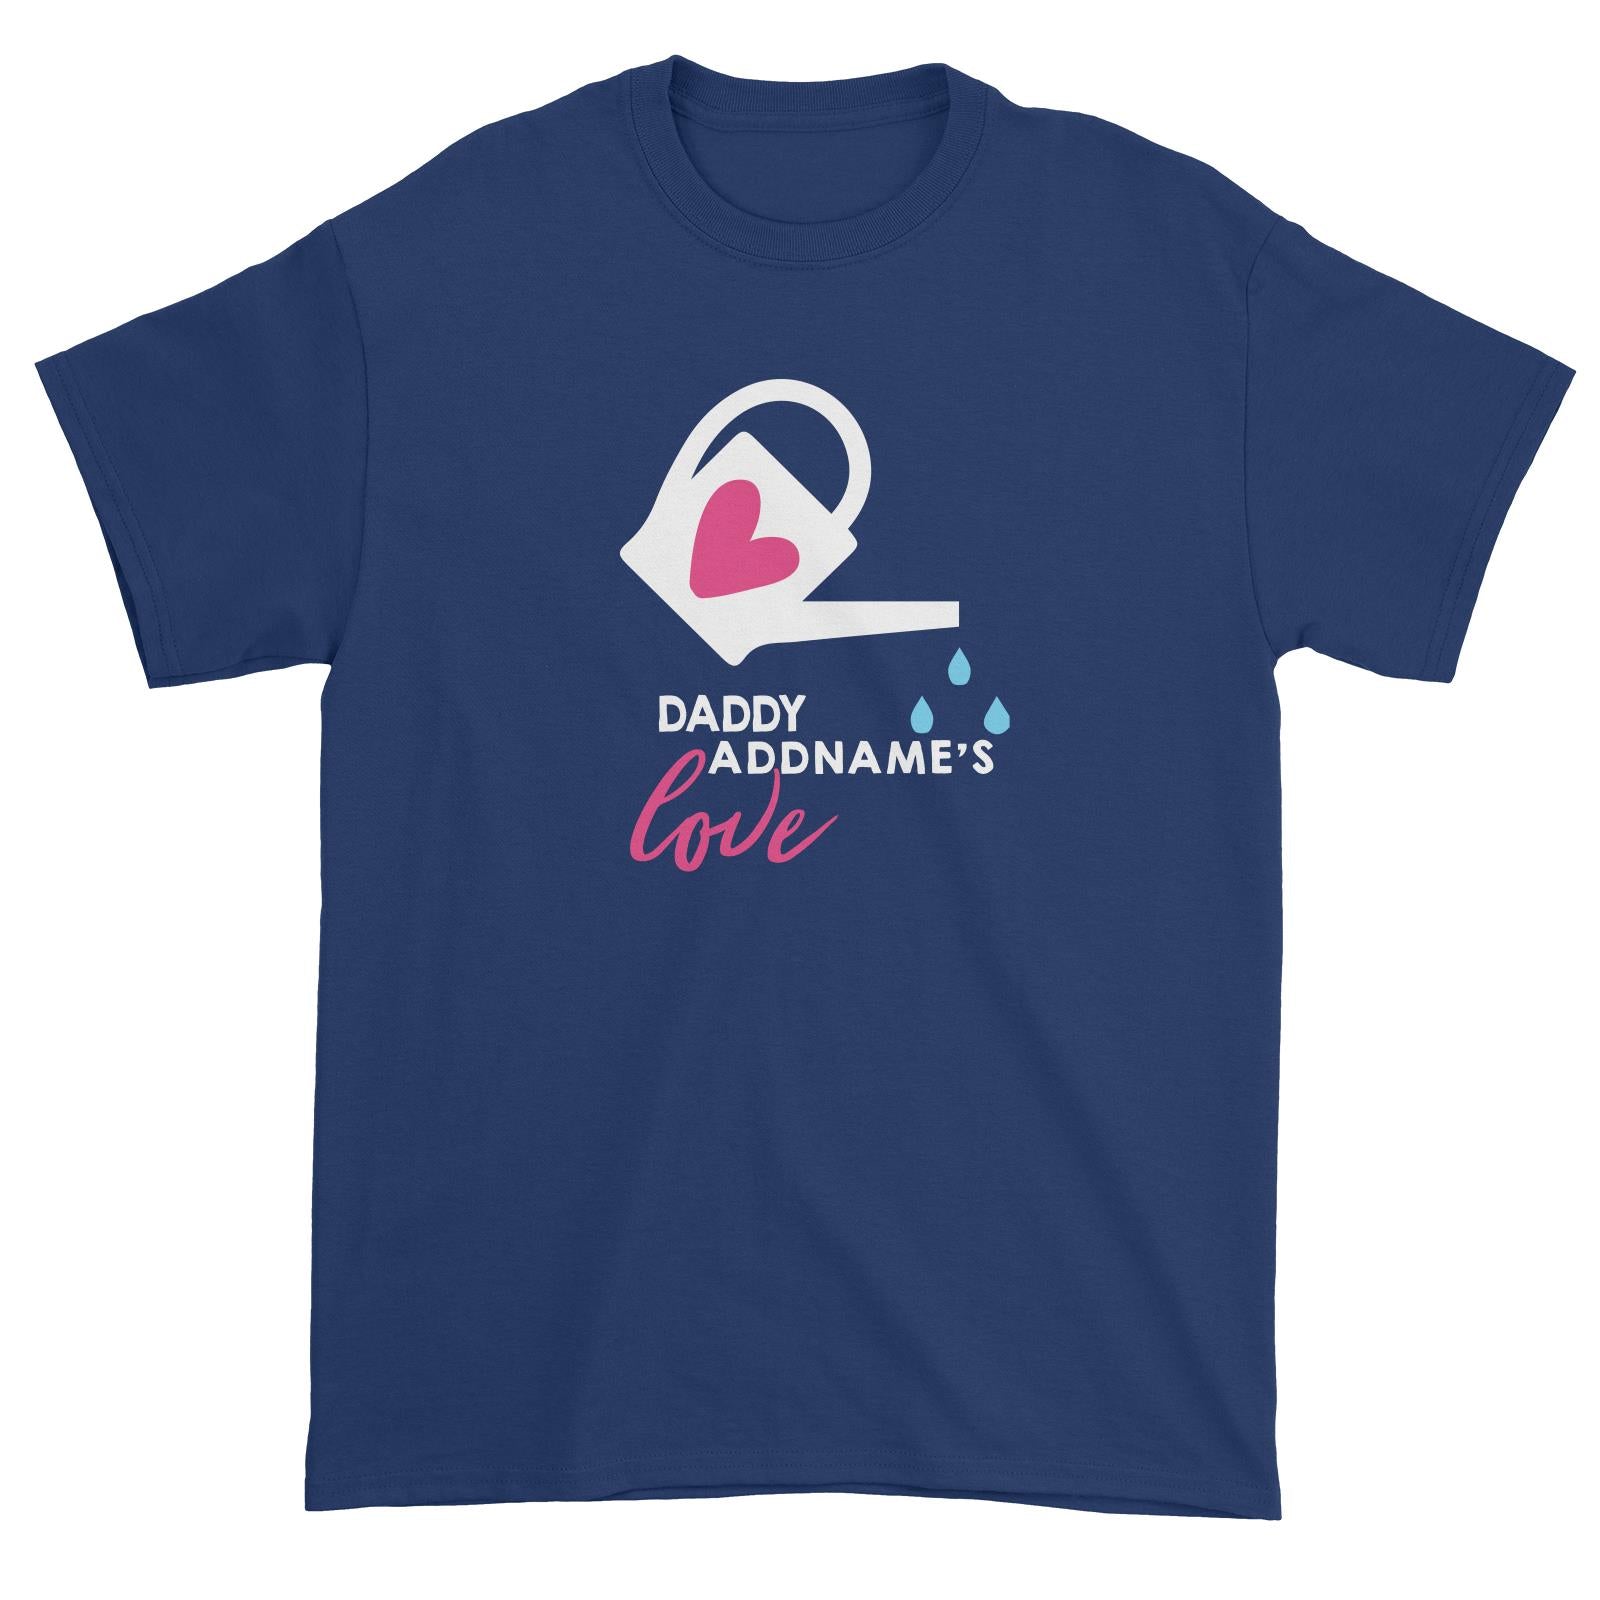 Nurturing Daddy's Love Addname Unisex T-Shirt  Matching Family Personalizable Designs